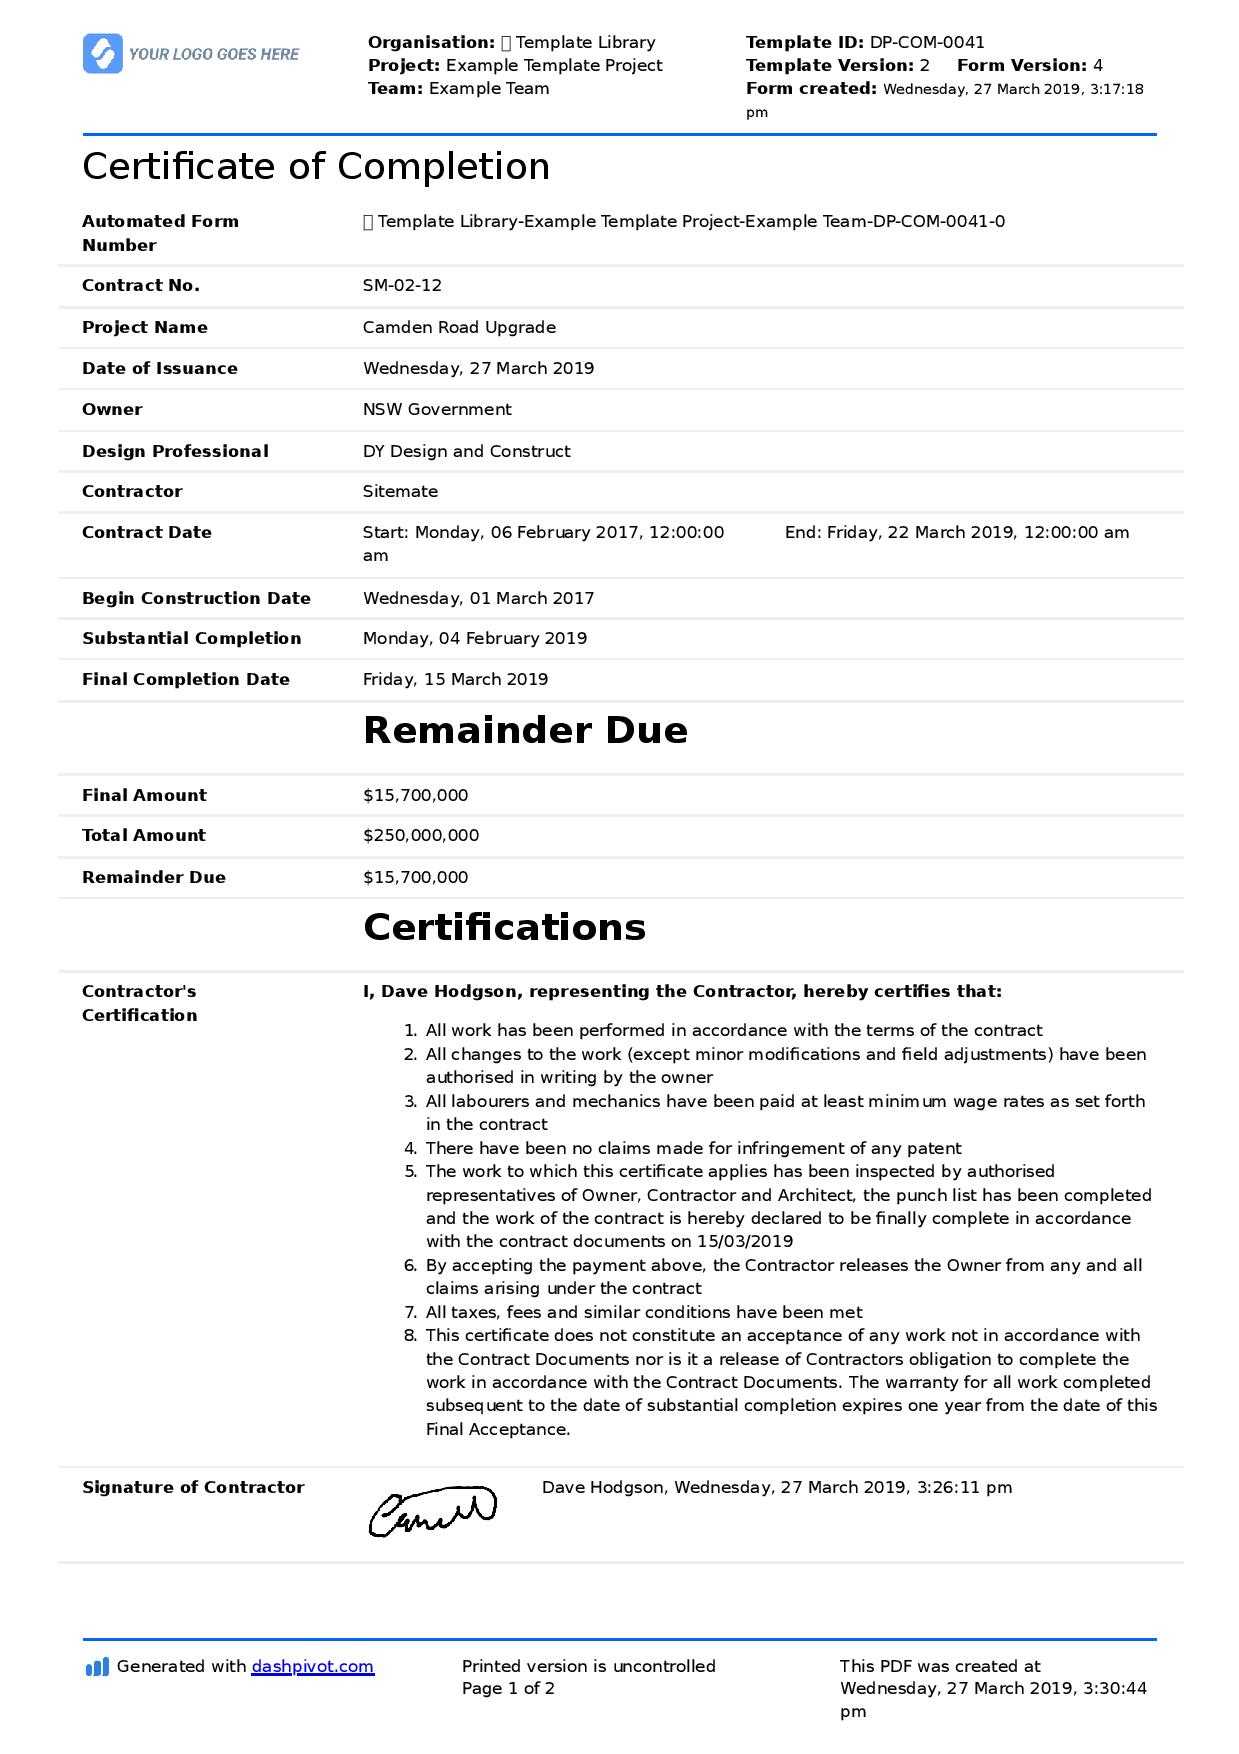 Certificate Of Completion For Construction (Free Template + Regarding Construction Certificate Of Completion Template